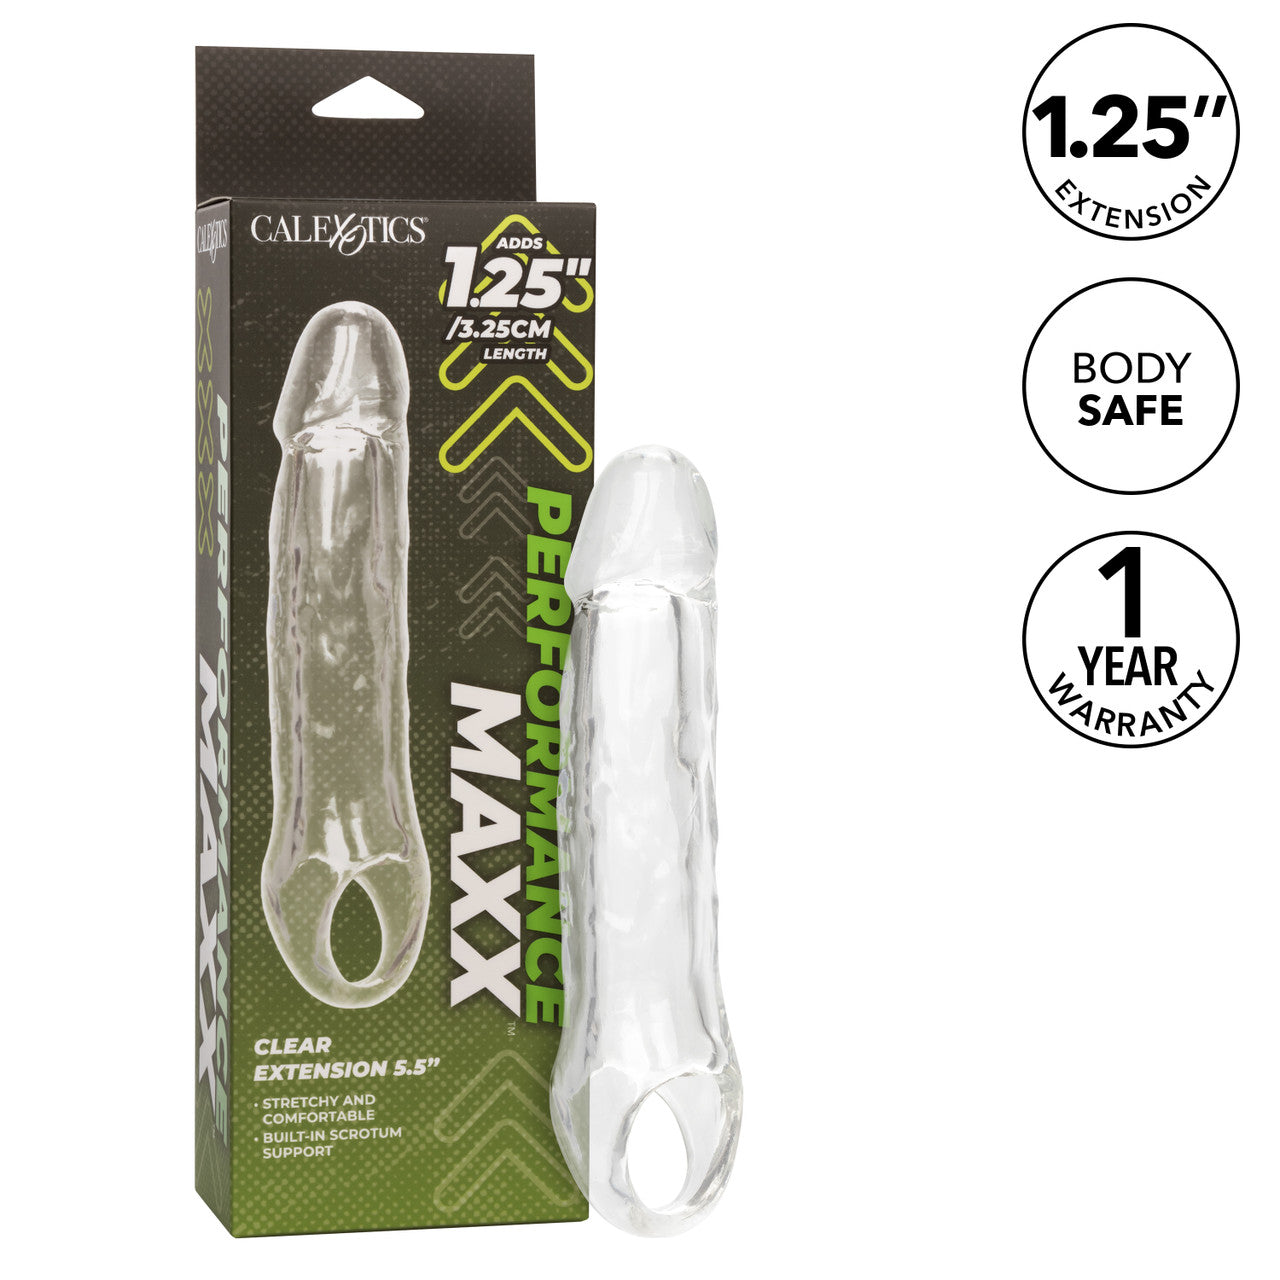 Performance Maxx Clear Extension 5.5"